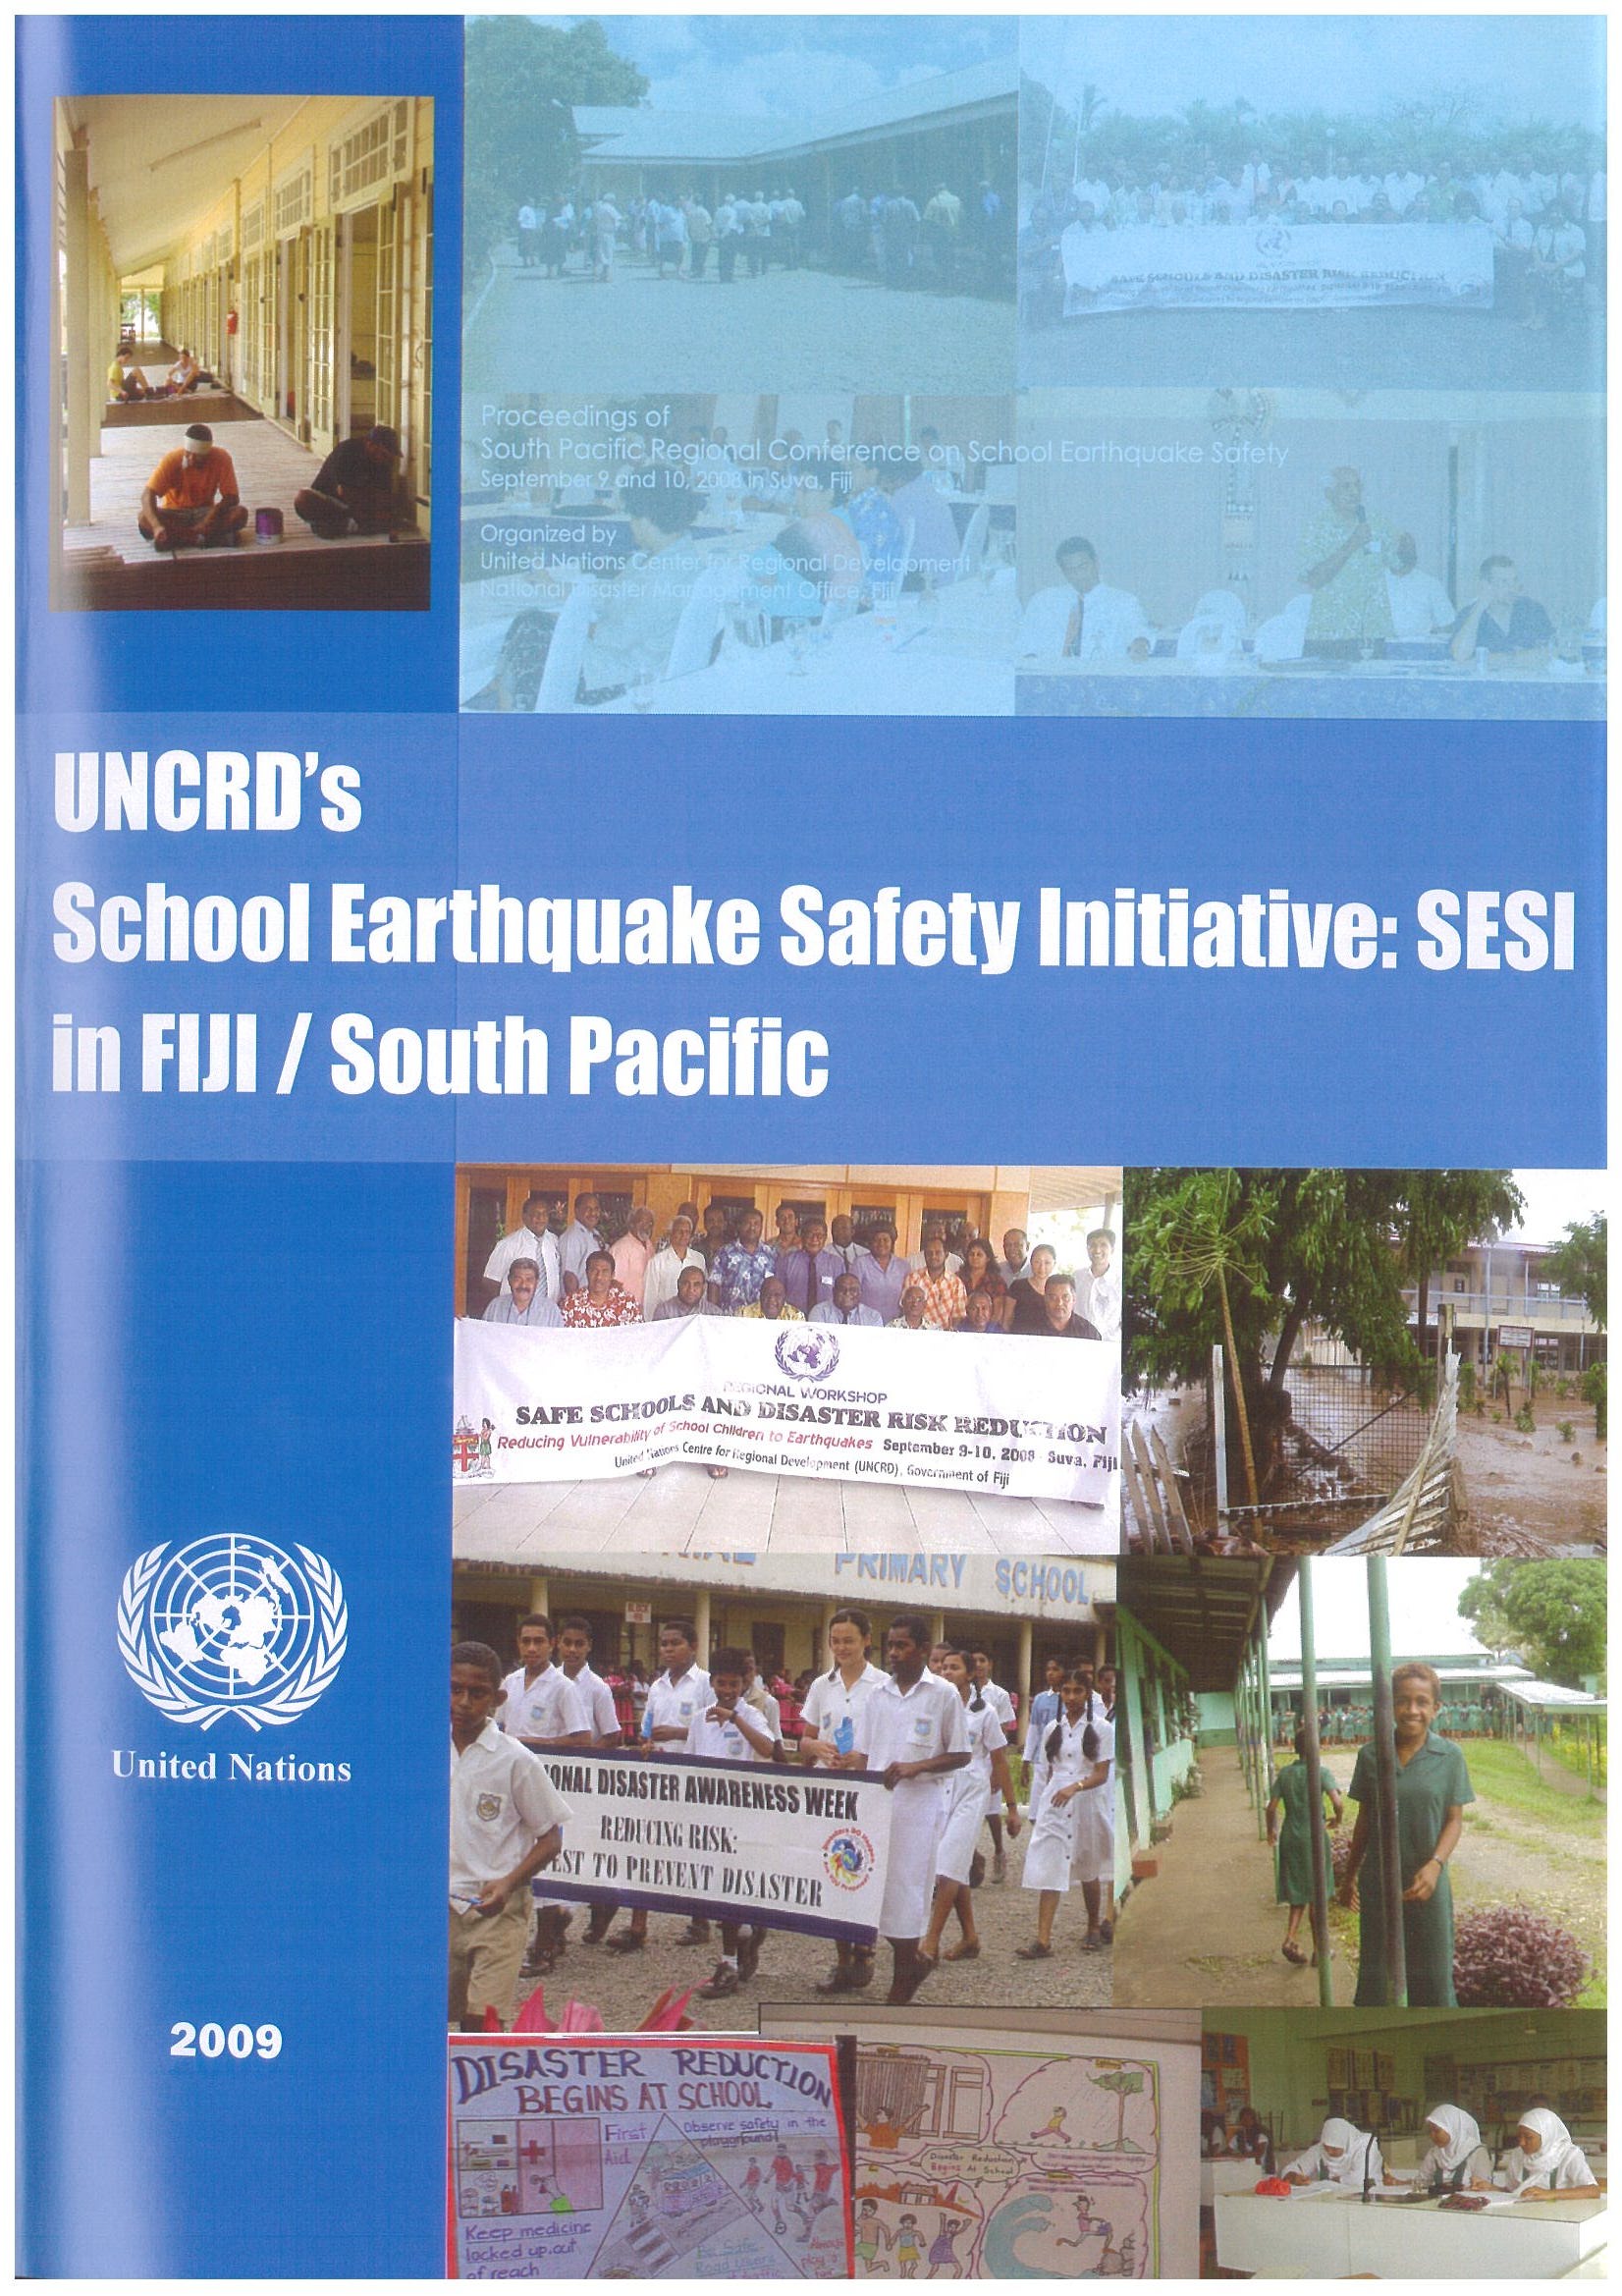 Cover of the proceedings of the South Pacific Regional Conference on School Earthquake Safety, Septe